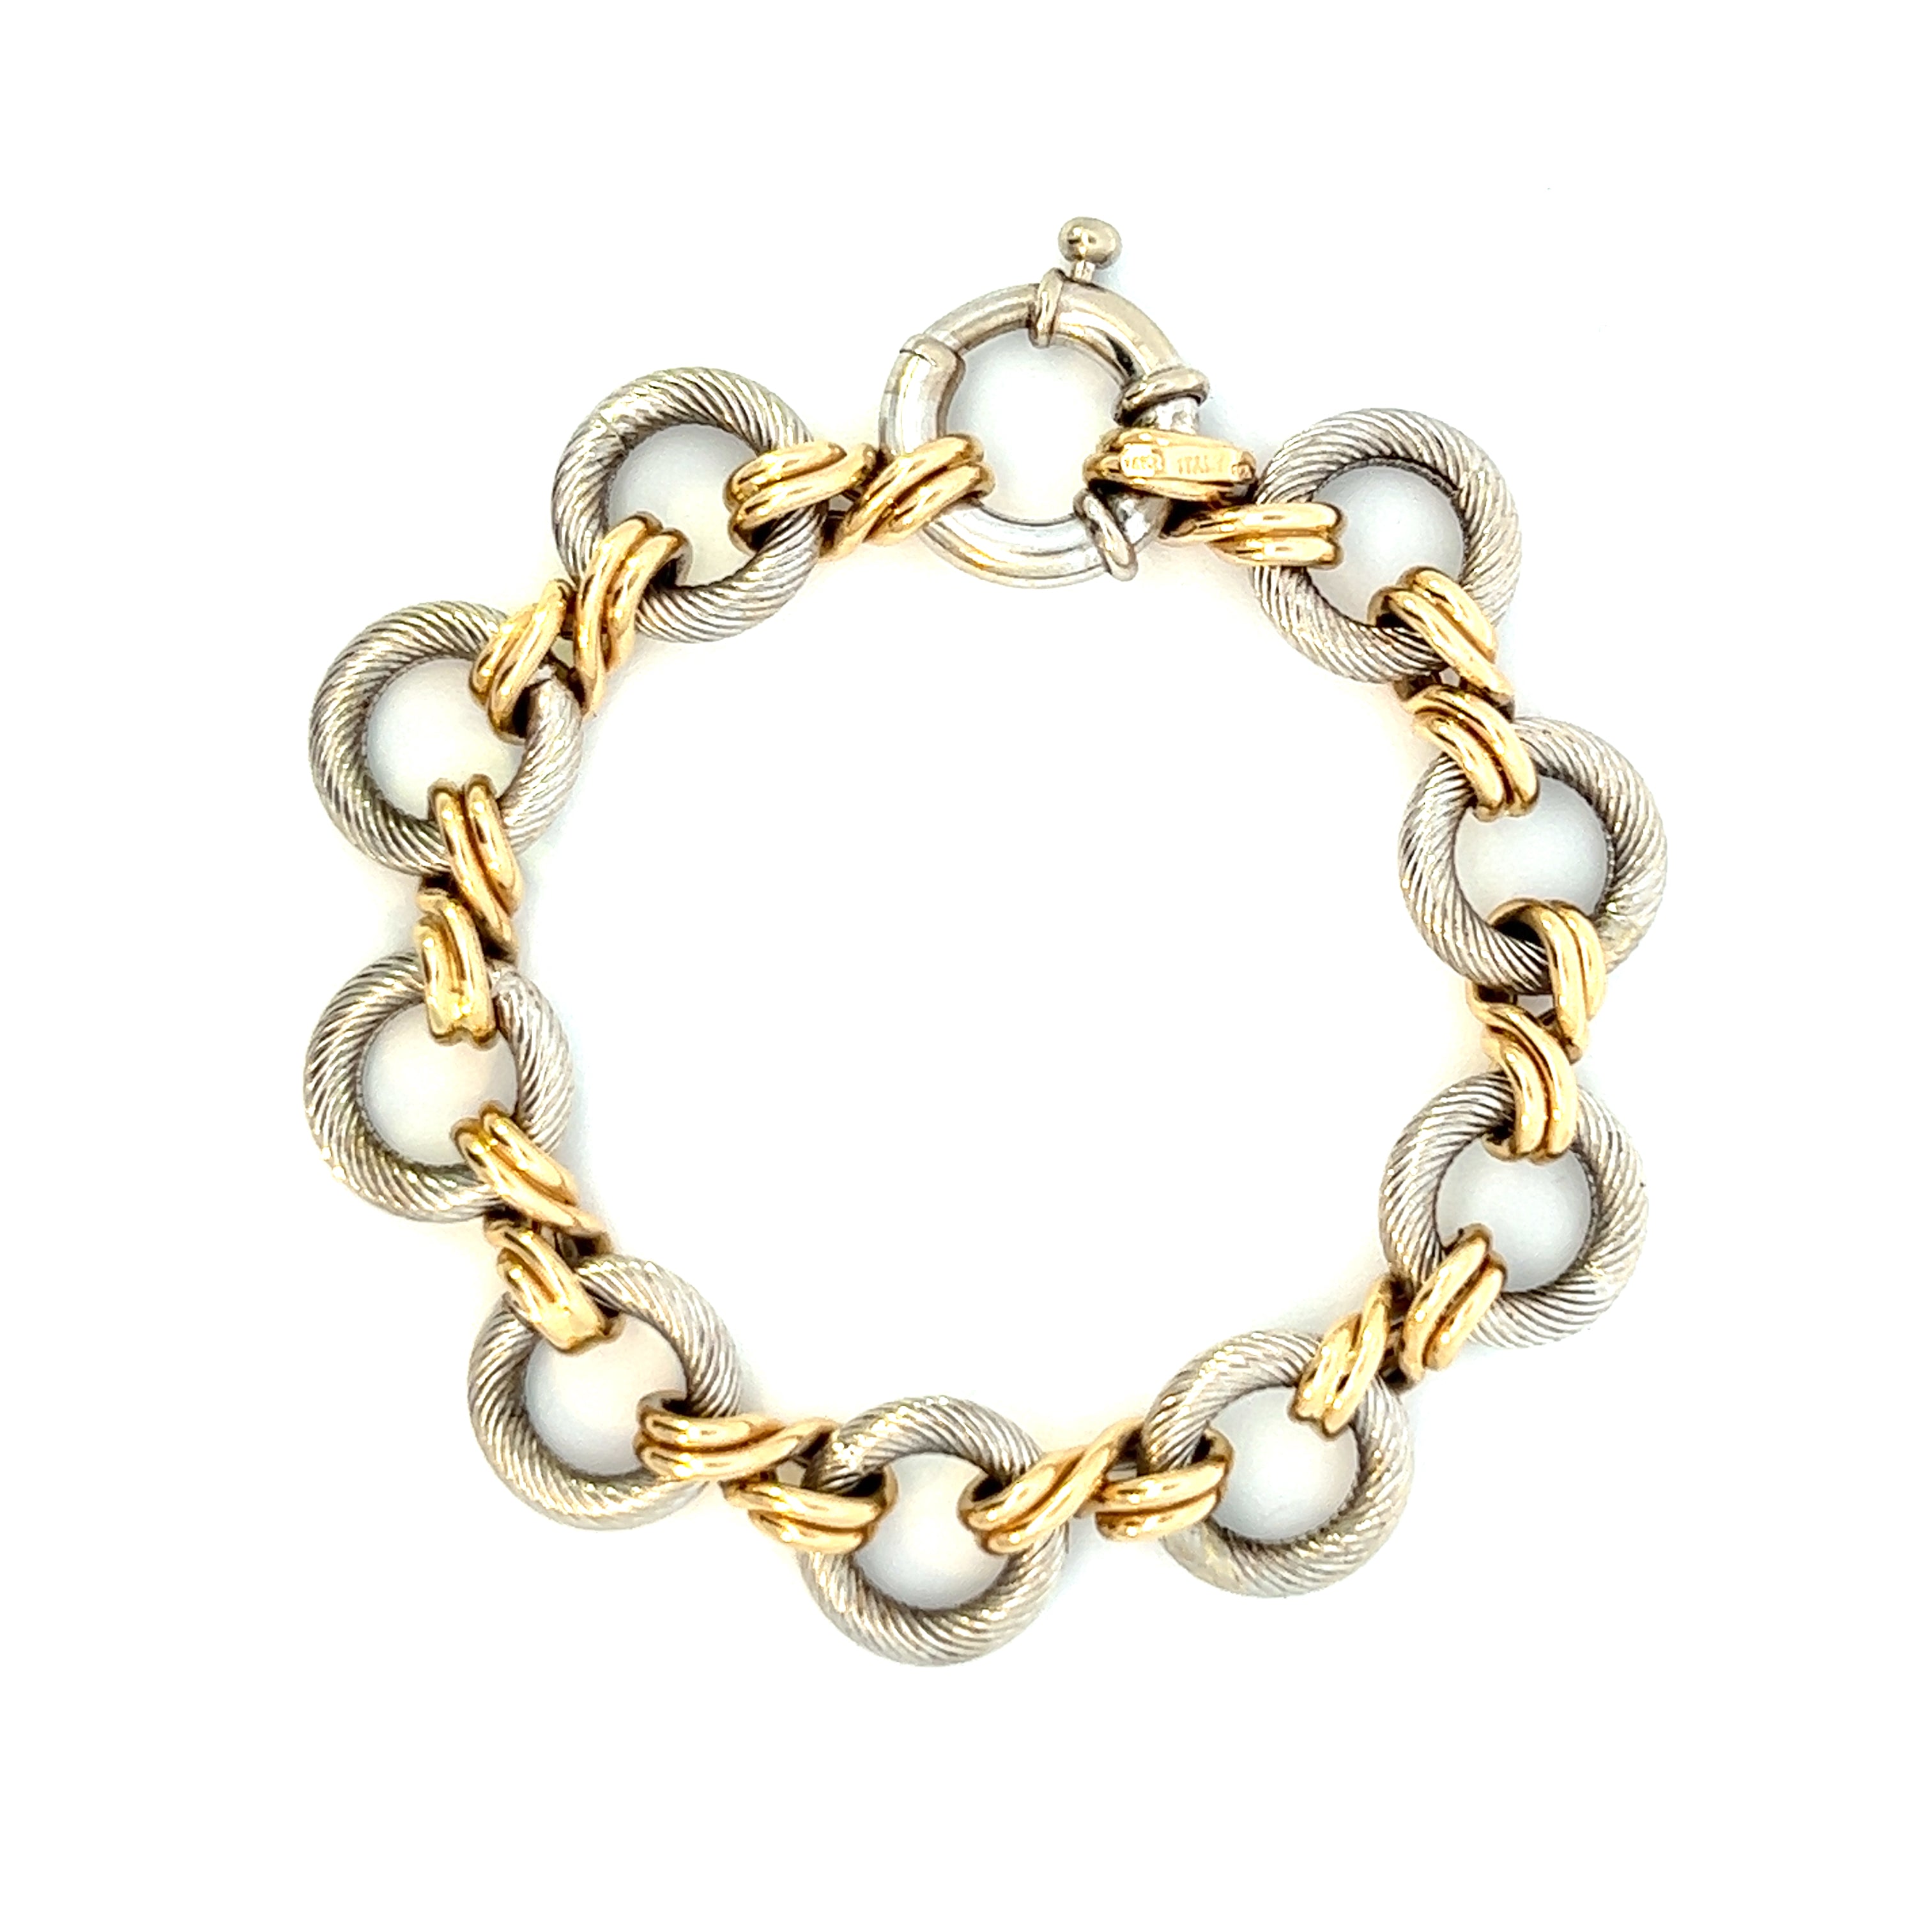 Vintage textured 14k White and Yellow Gold Bracelet